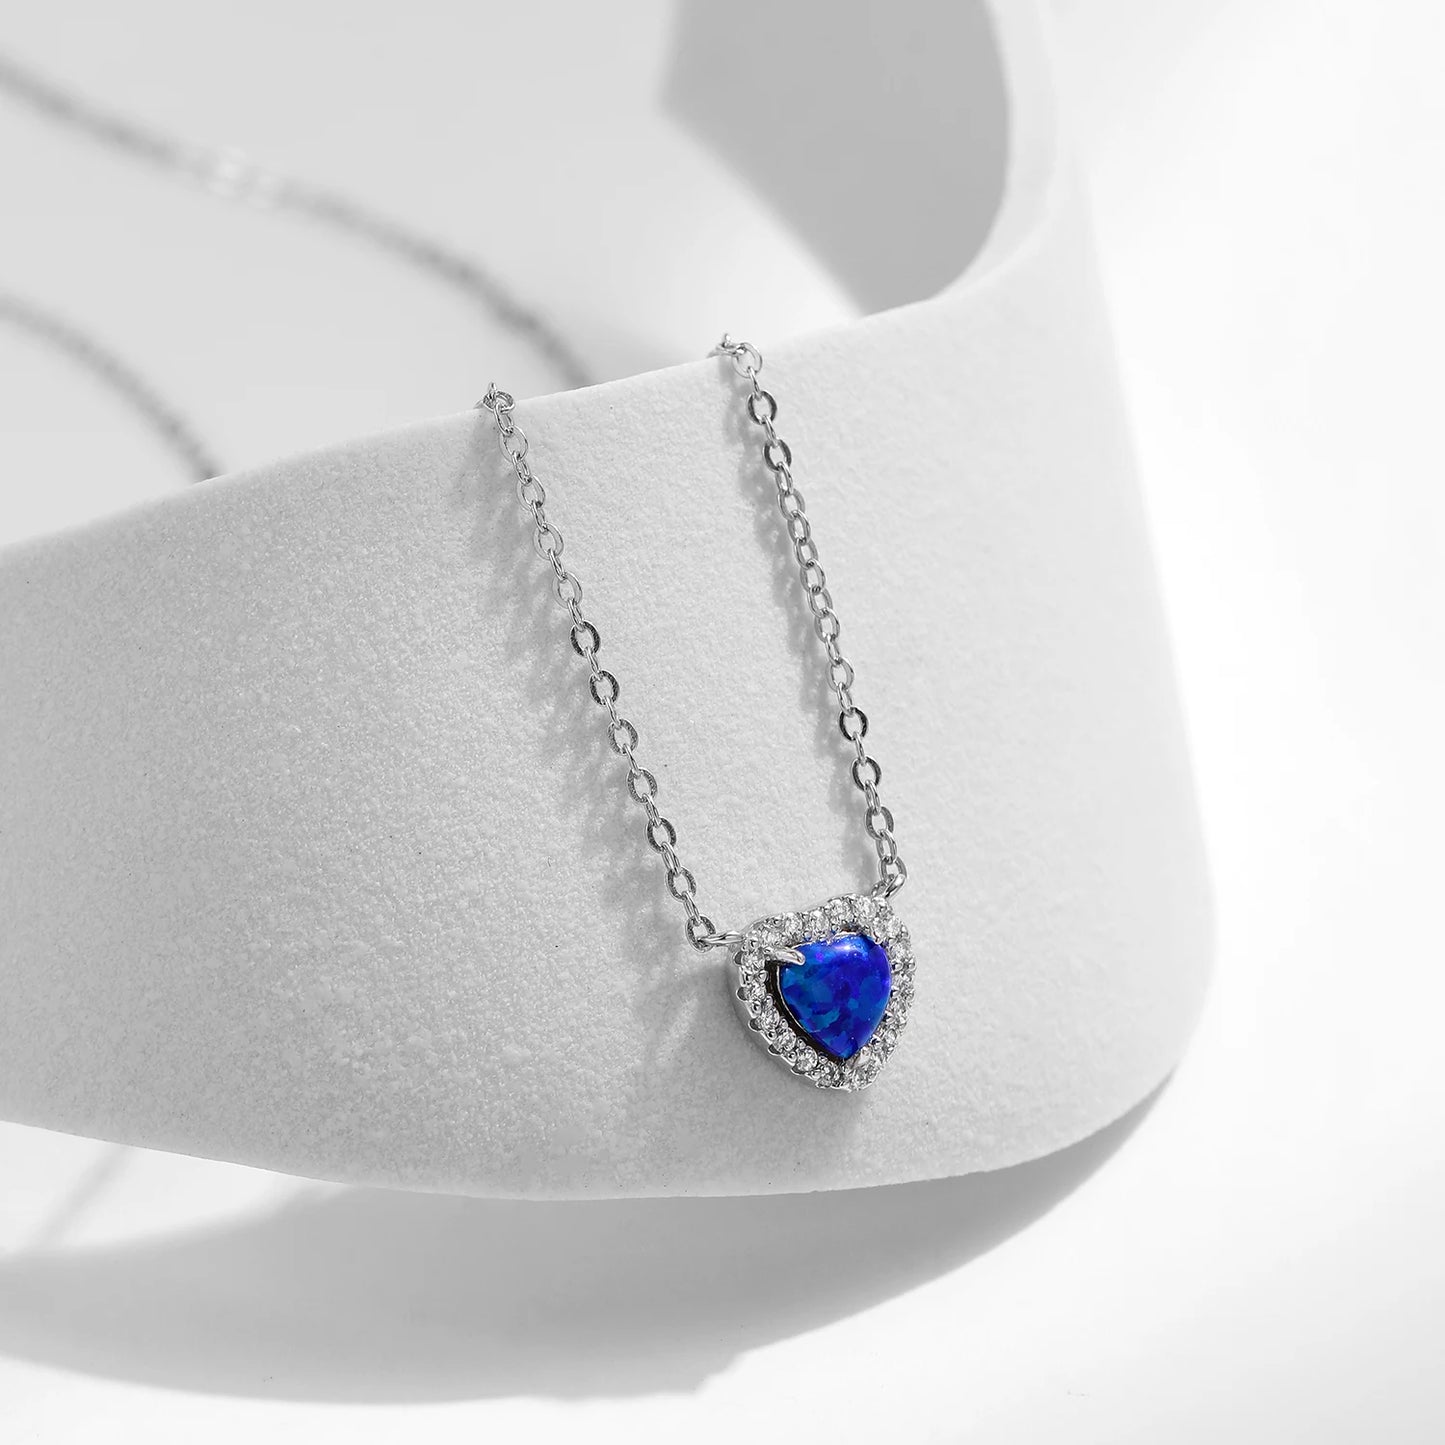 Stunning Blue 925 Silver Jewellery Set for Women - Necklace, Ring, Earrings